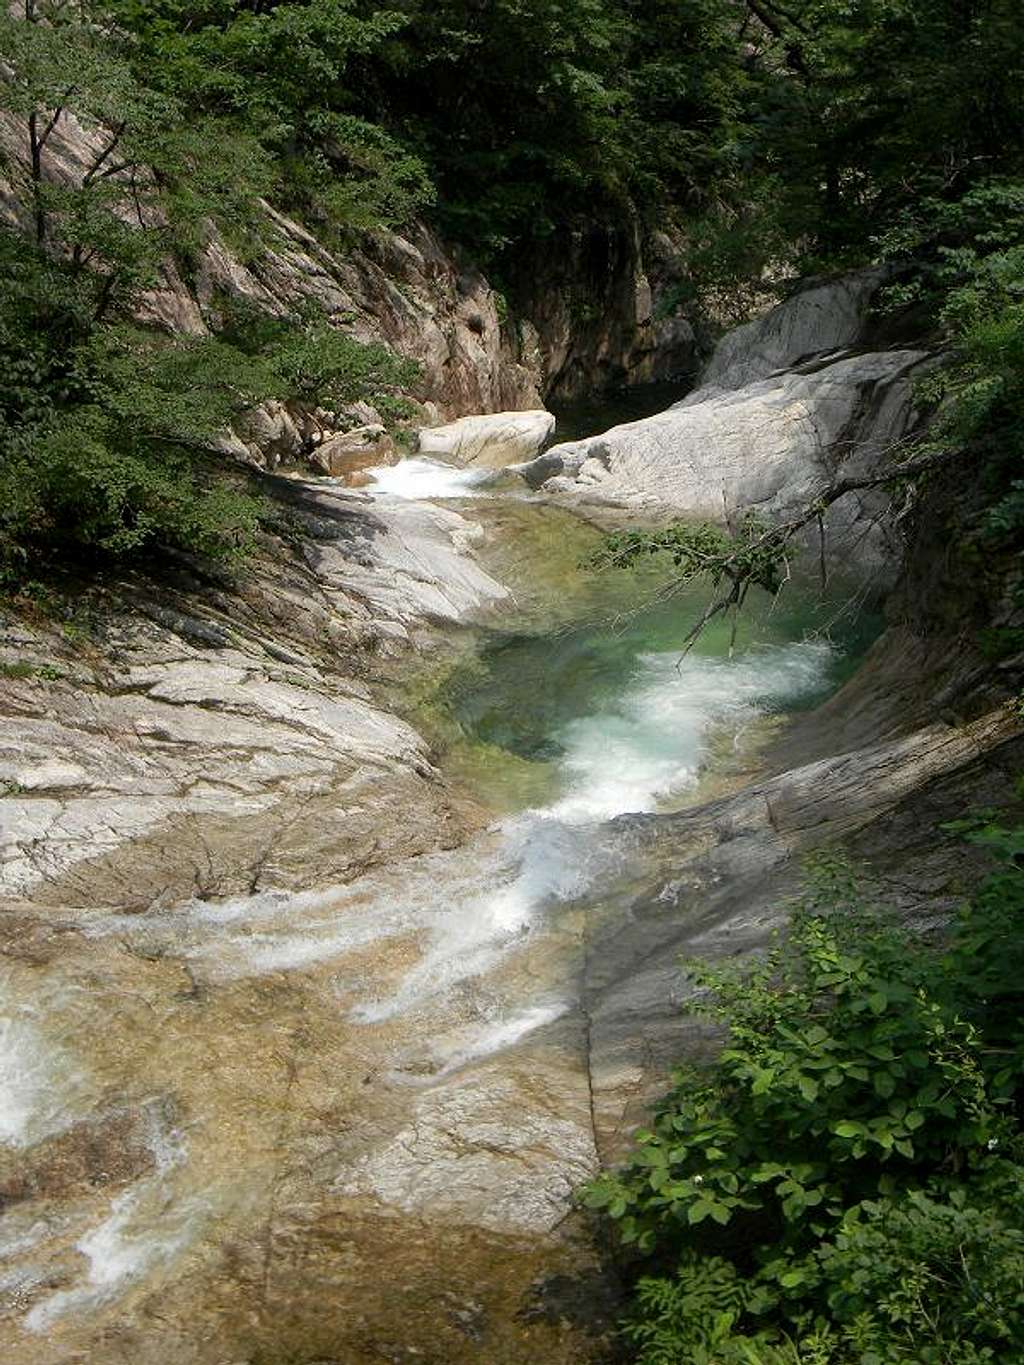 Pools and Cascades in the Cheonbuldong Valley